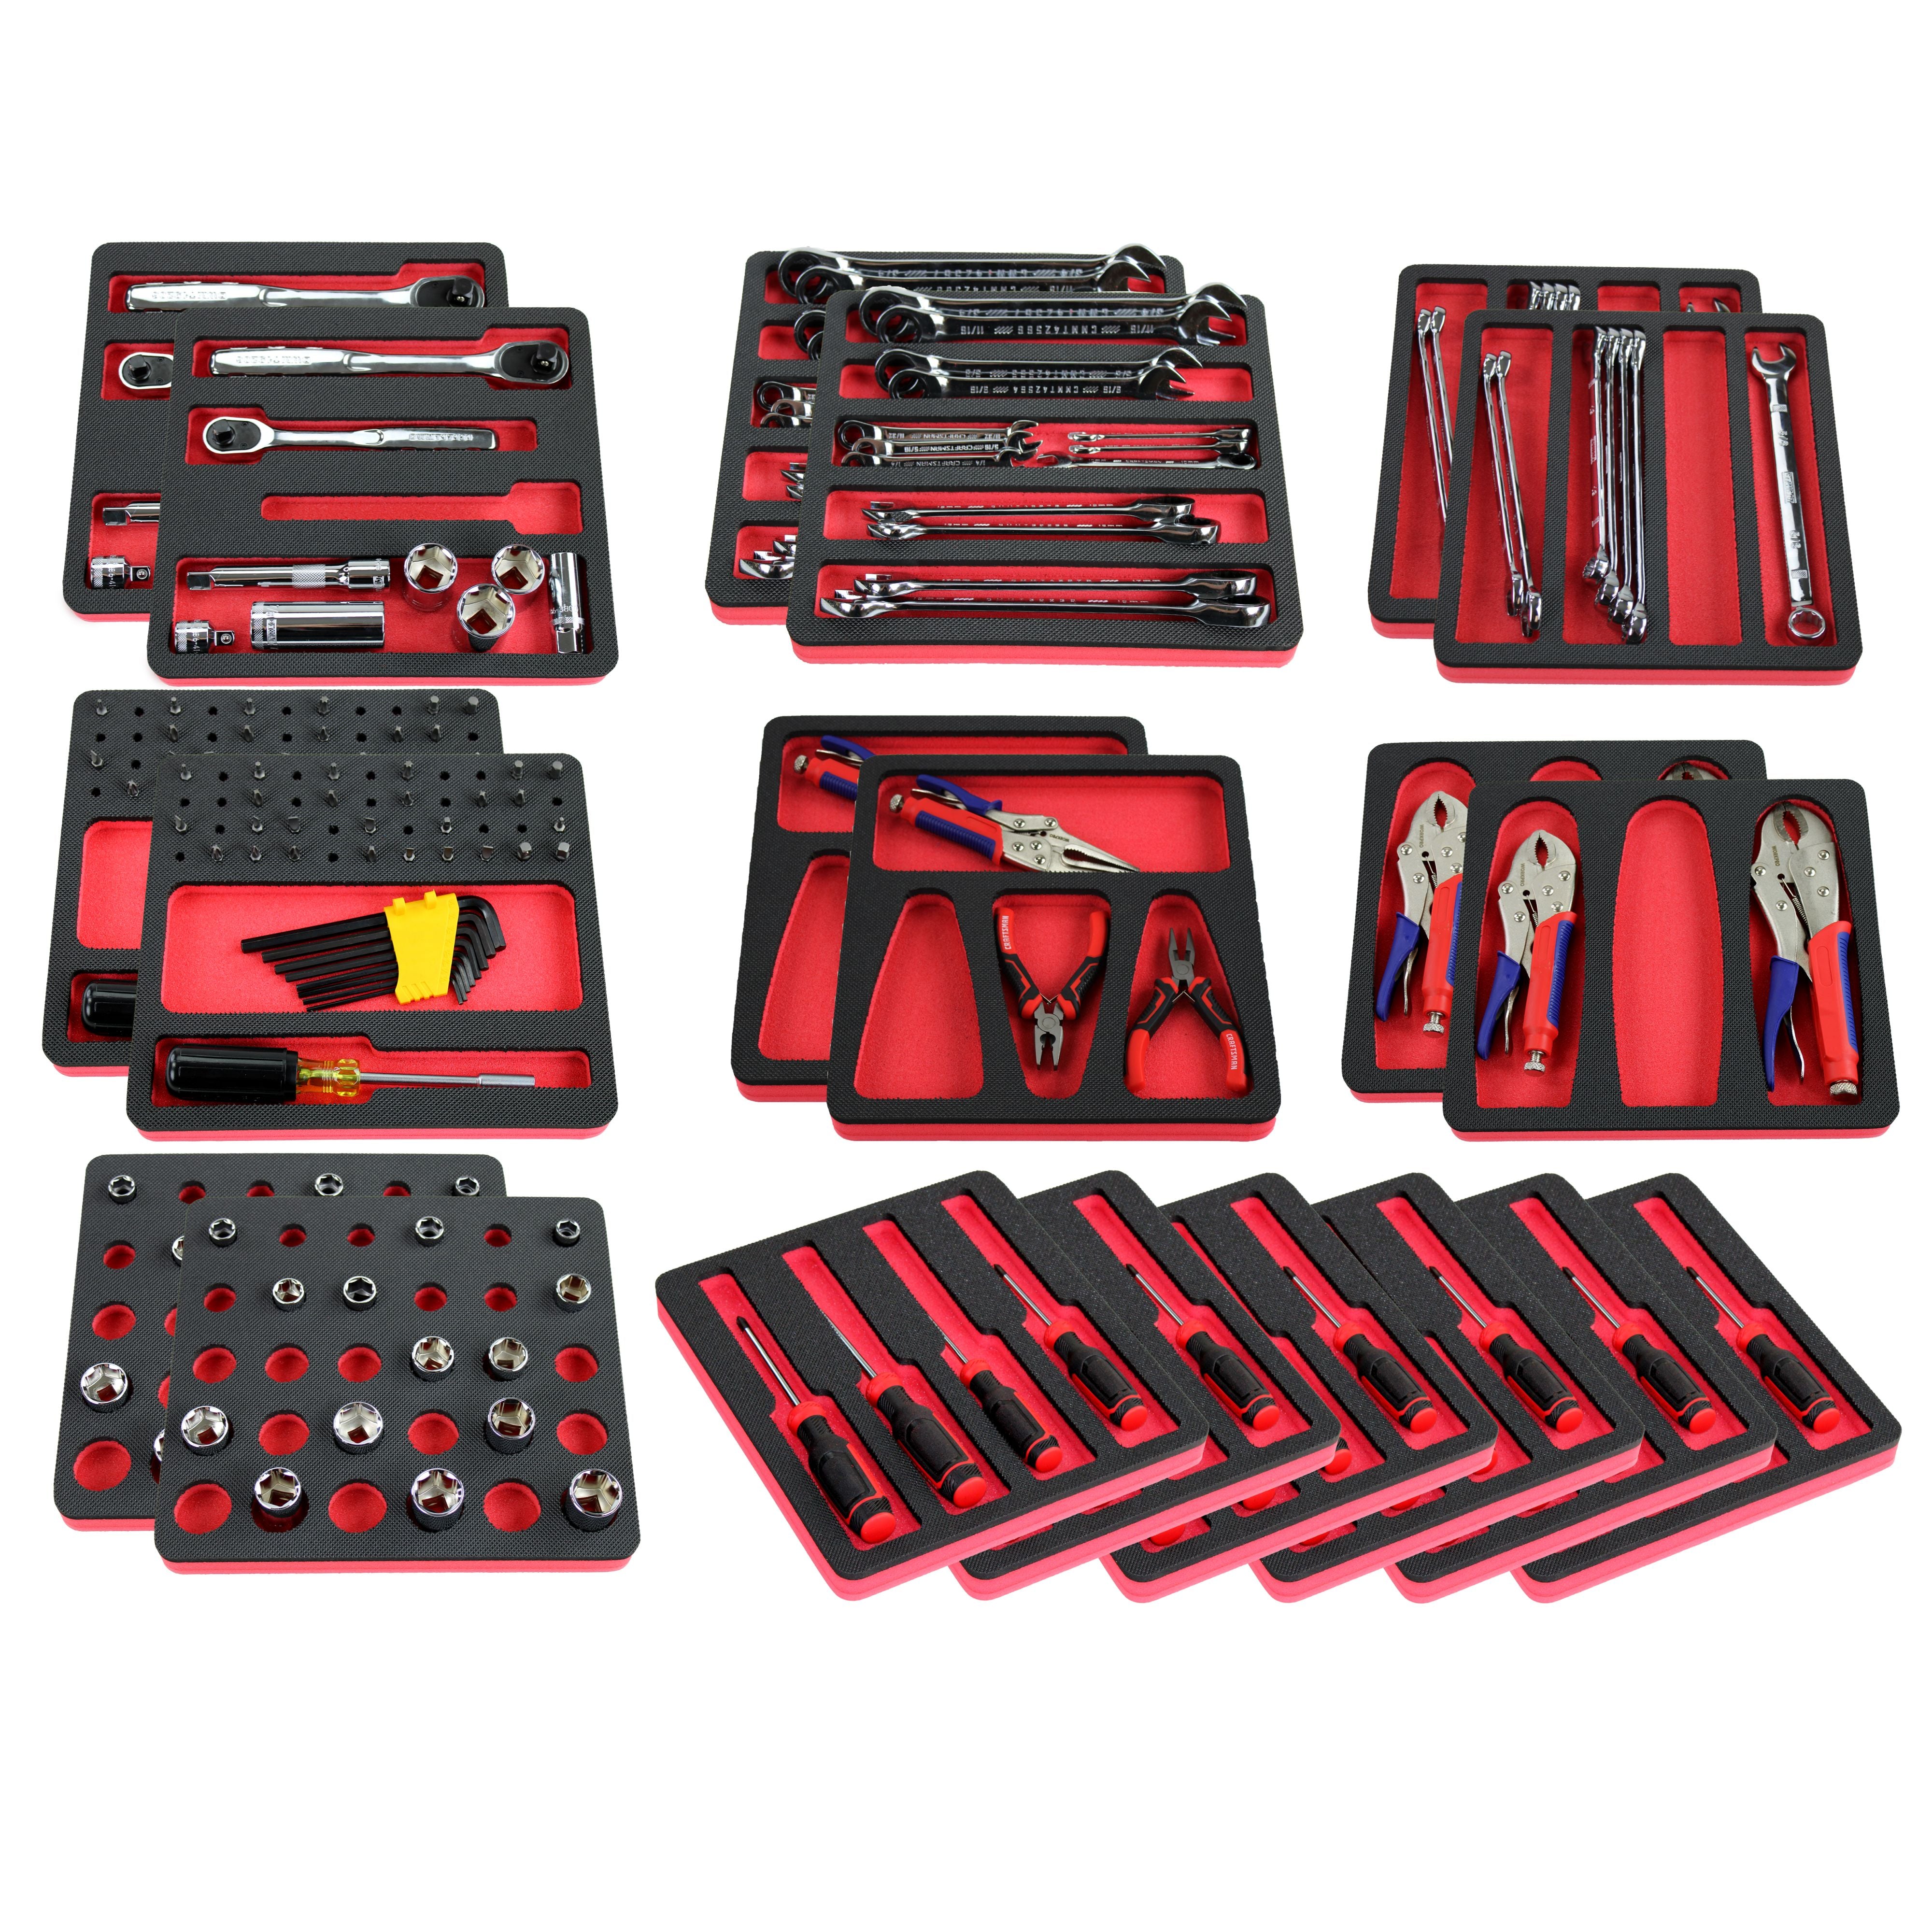 Tool Drawer Organizer 20-Piece Insert Set Red and Black Durable Foam Holds Many Tools and Accessories 10 x 11 Inch Trays Fits Craftsman Husky Kobalt Milwaukee Many Others